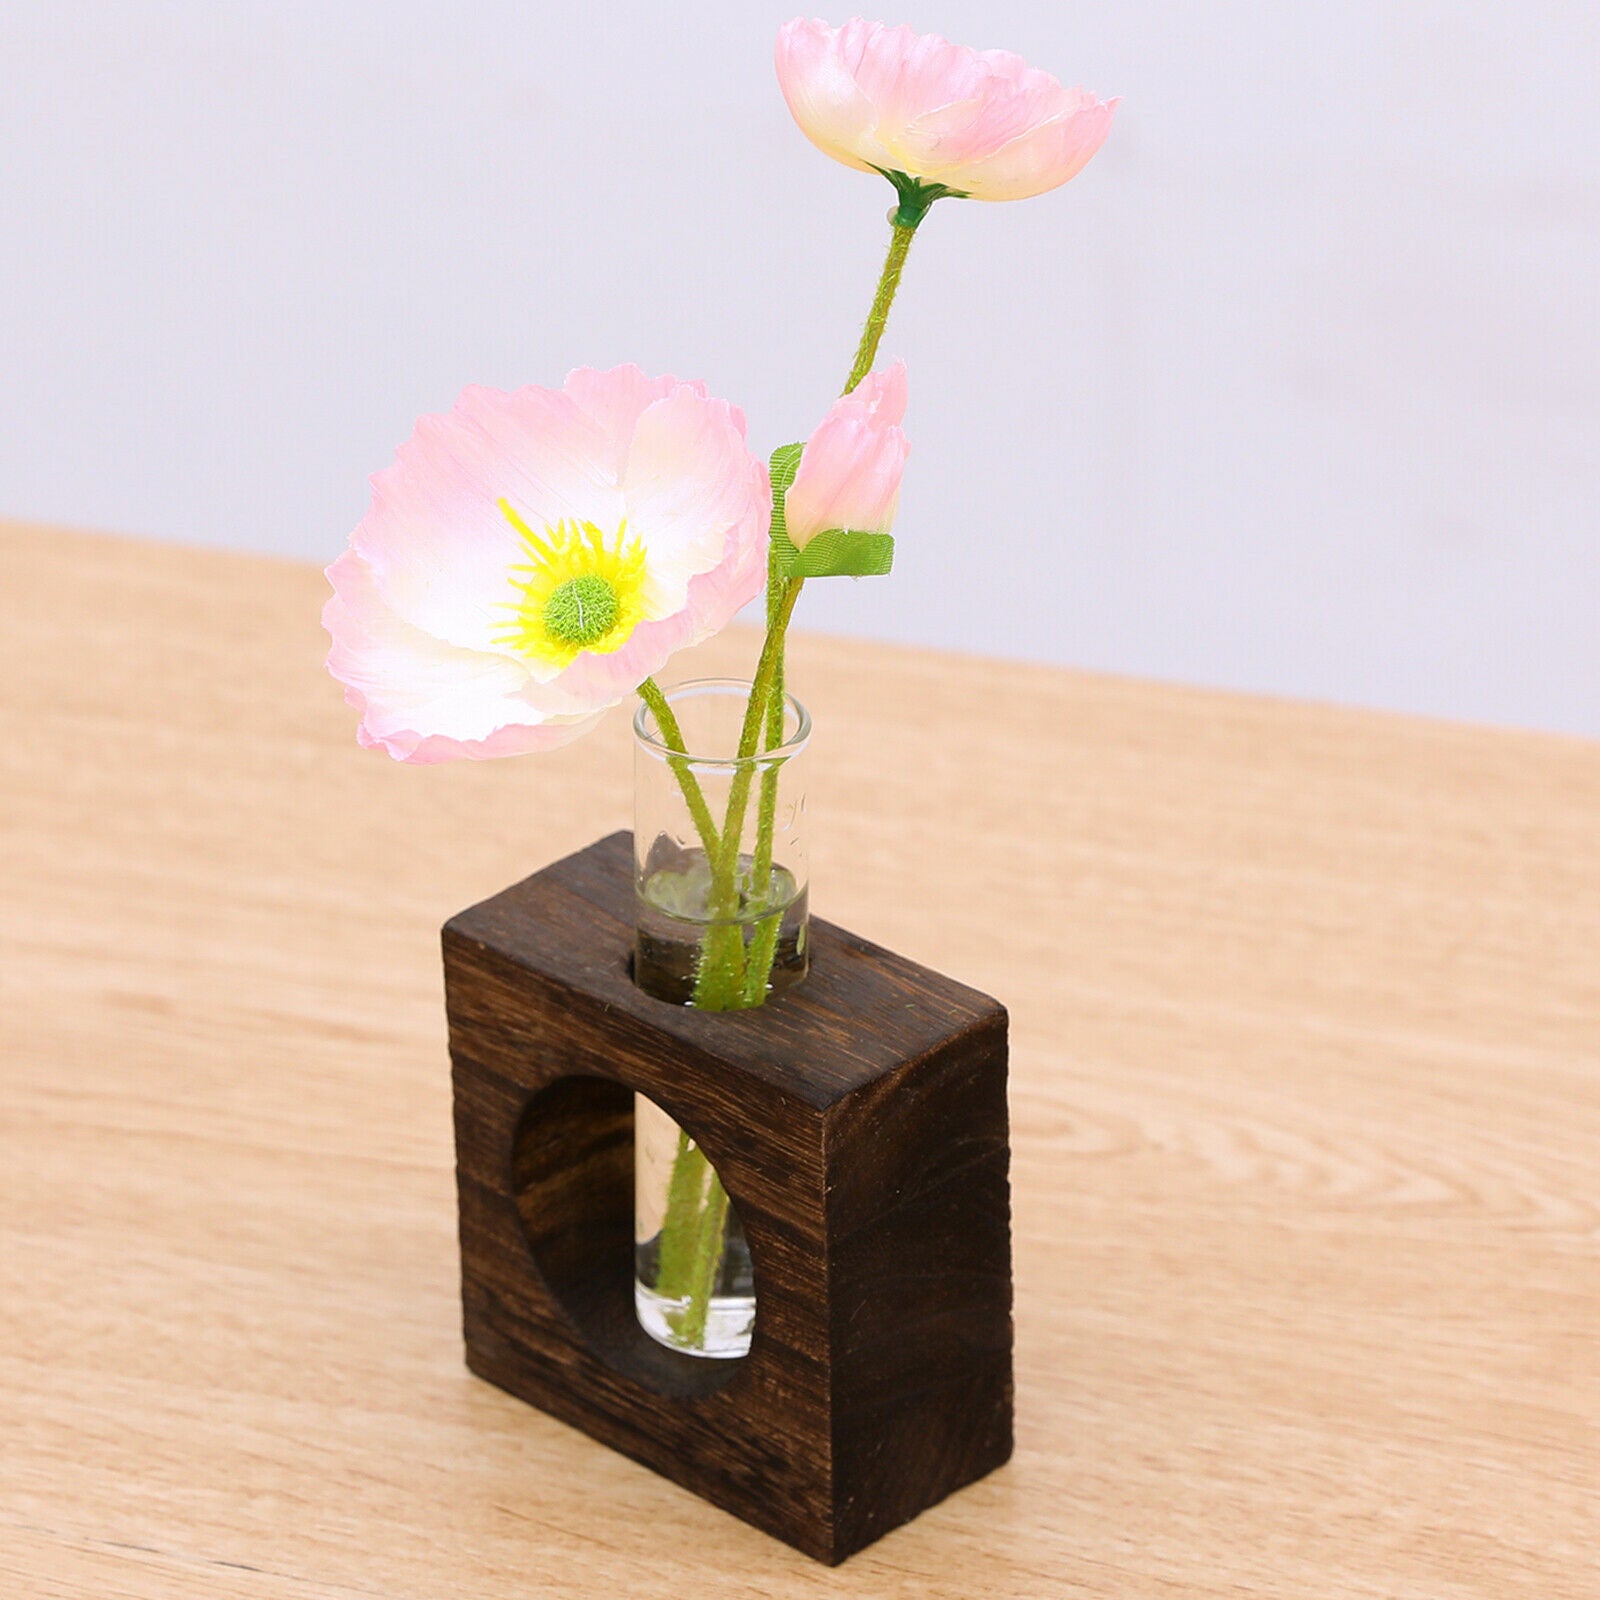 Single Test Tube Glass Vase in Wooden Stand Flower Pots for Home Office